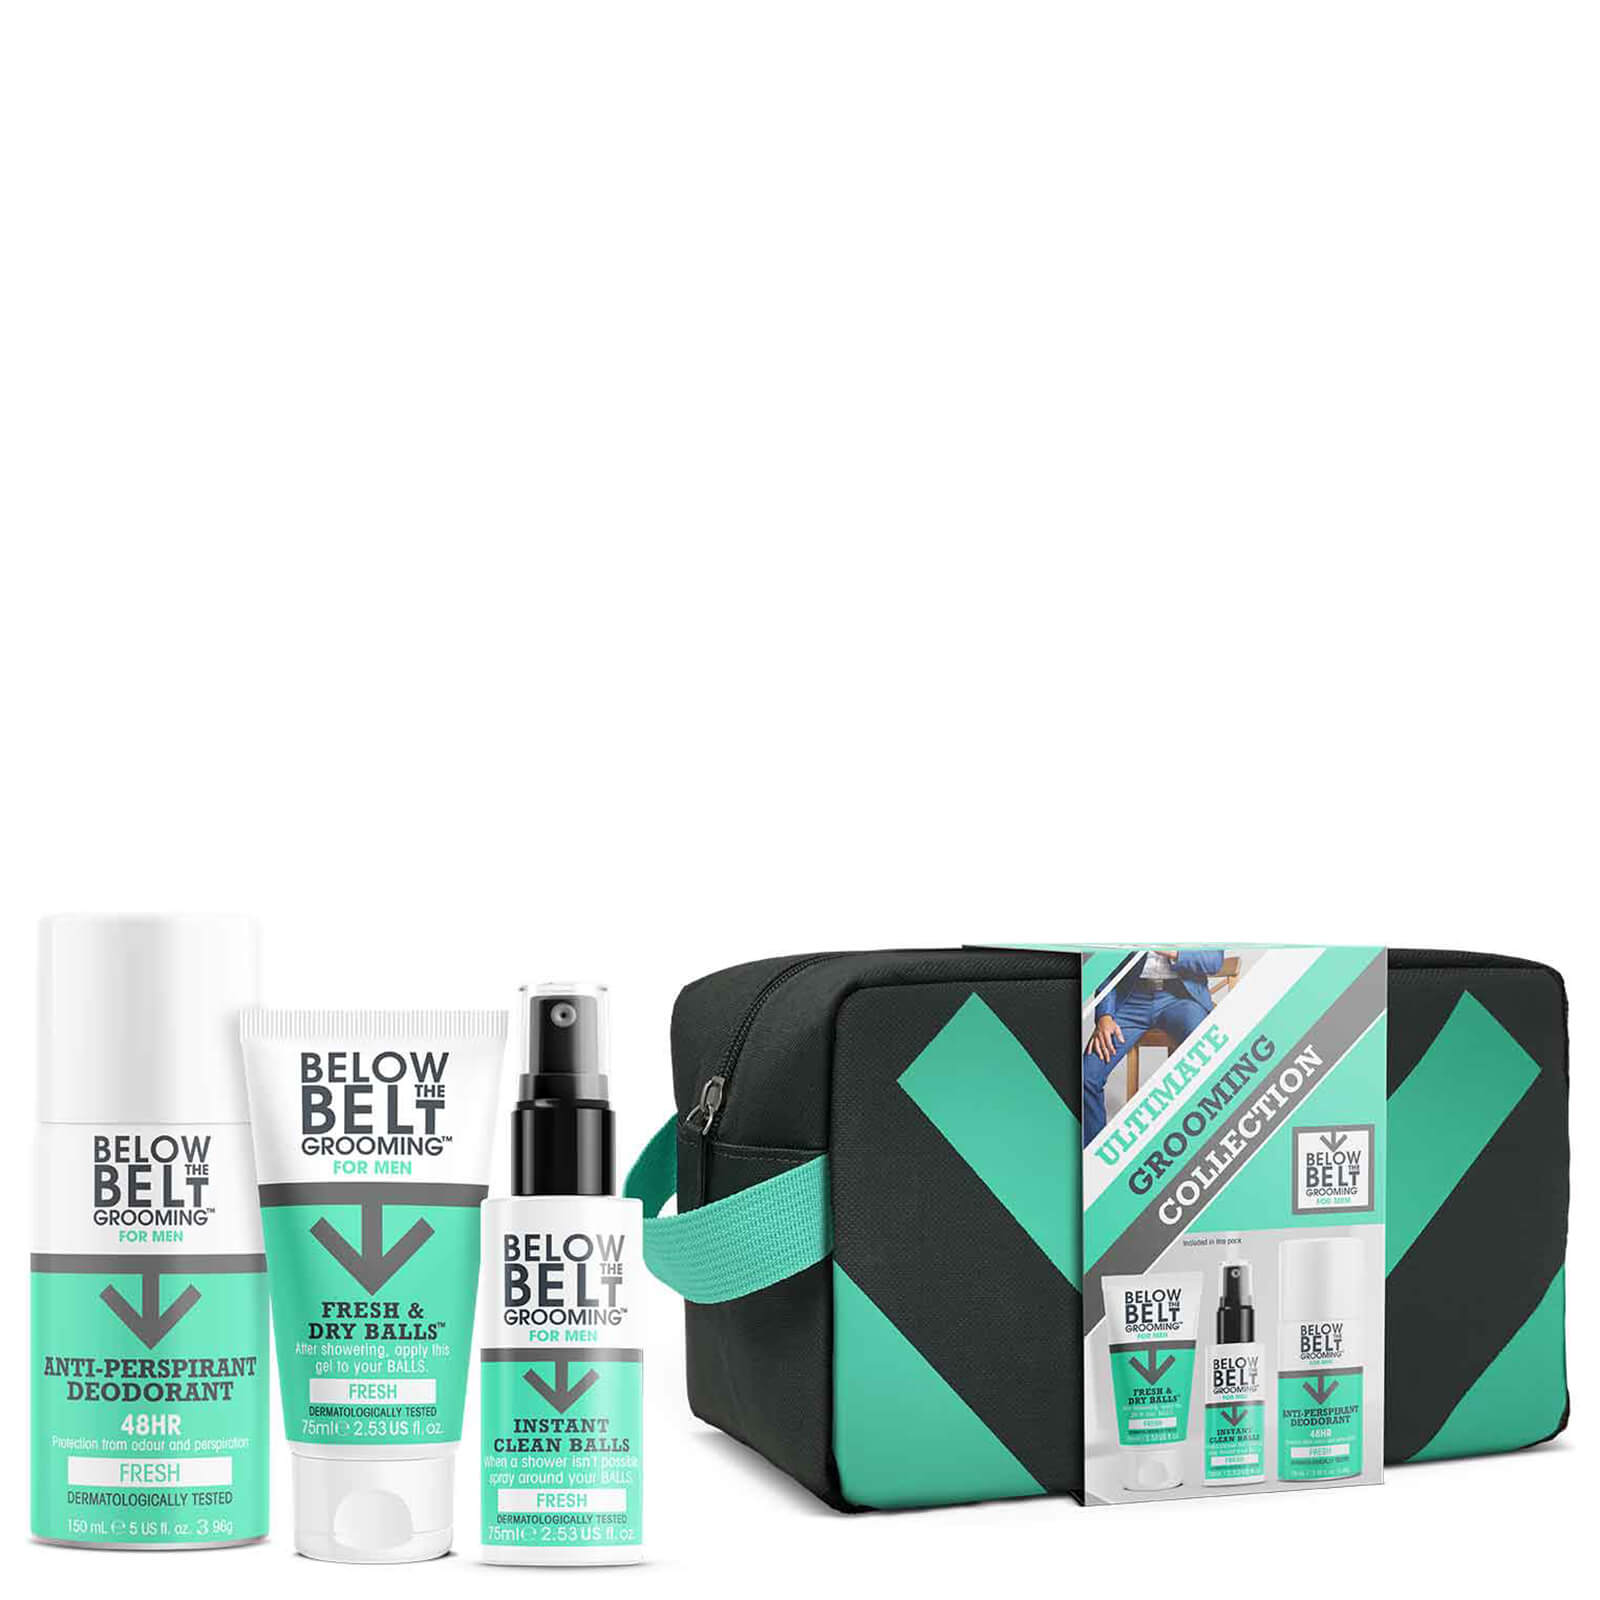 Below the Belt Grooming Gift Box - The Ultimate Collection